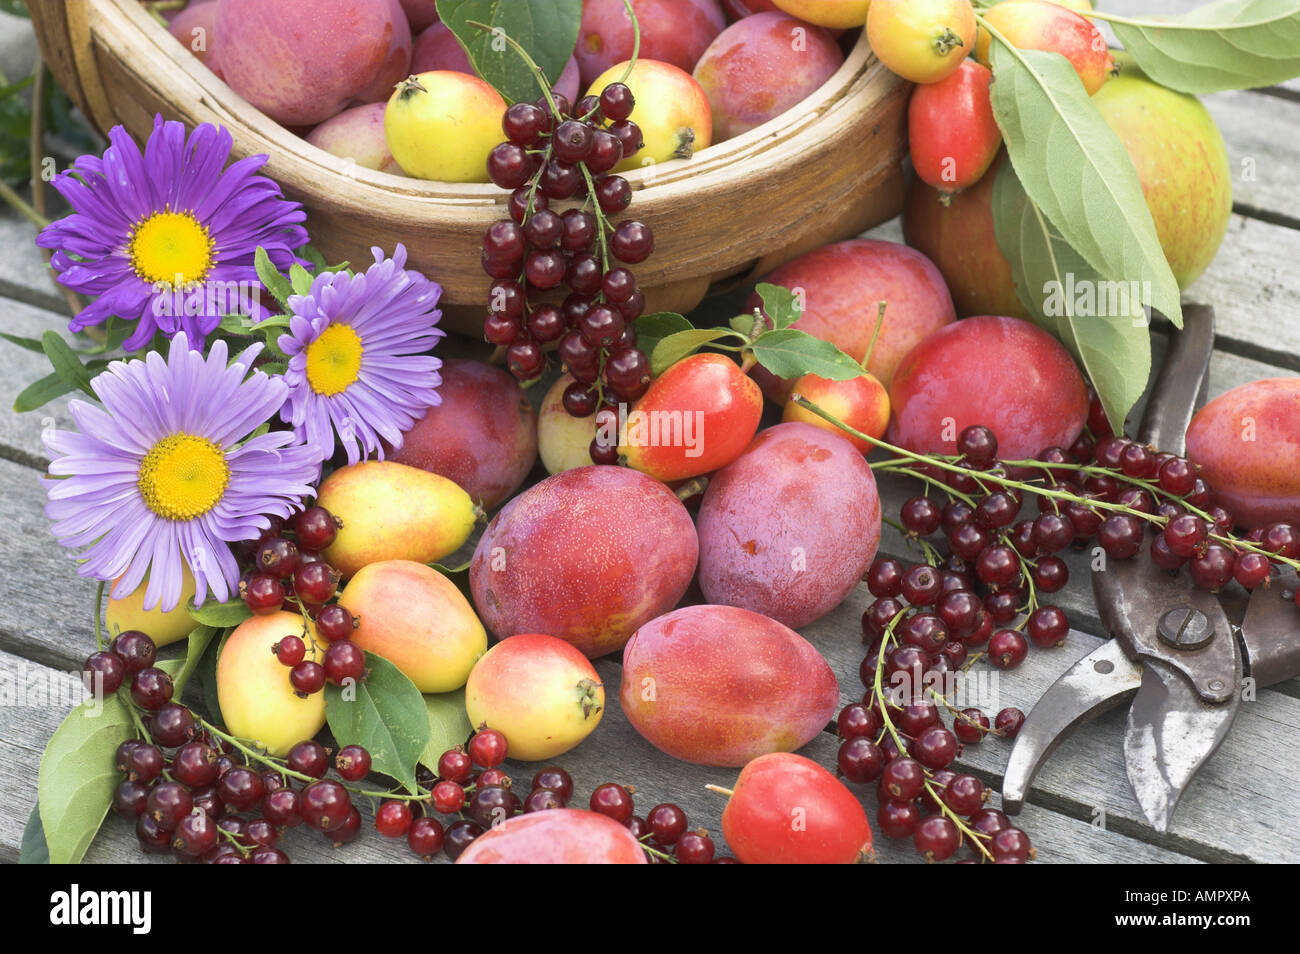 Freshly  picked Selection of home grown soft fruit, including apples, plums, red currants and berries, England, August Stock Photo